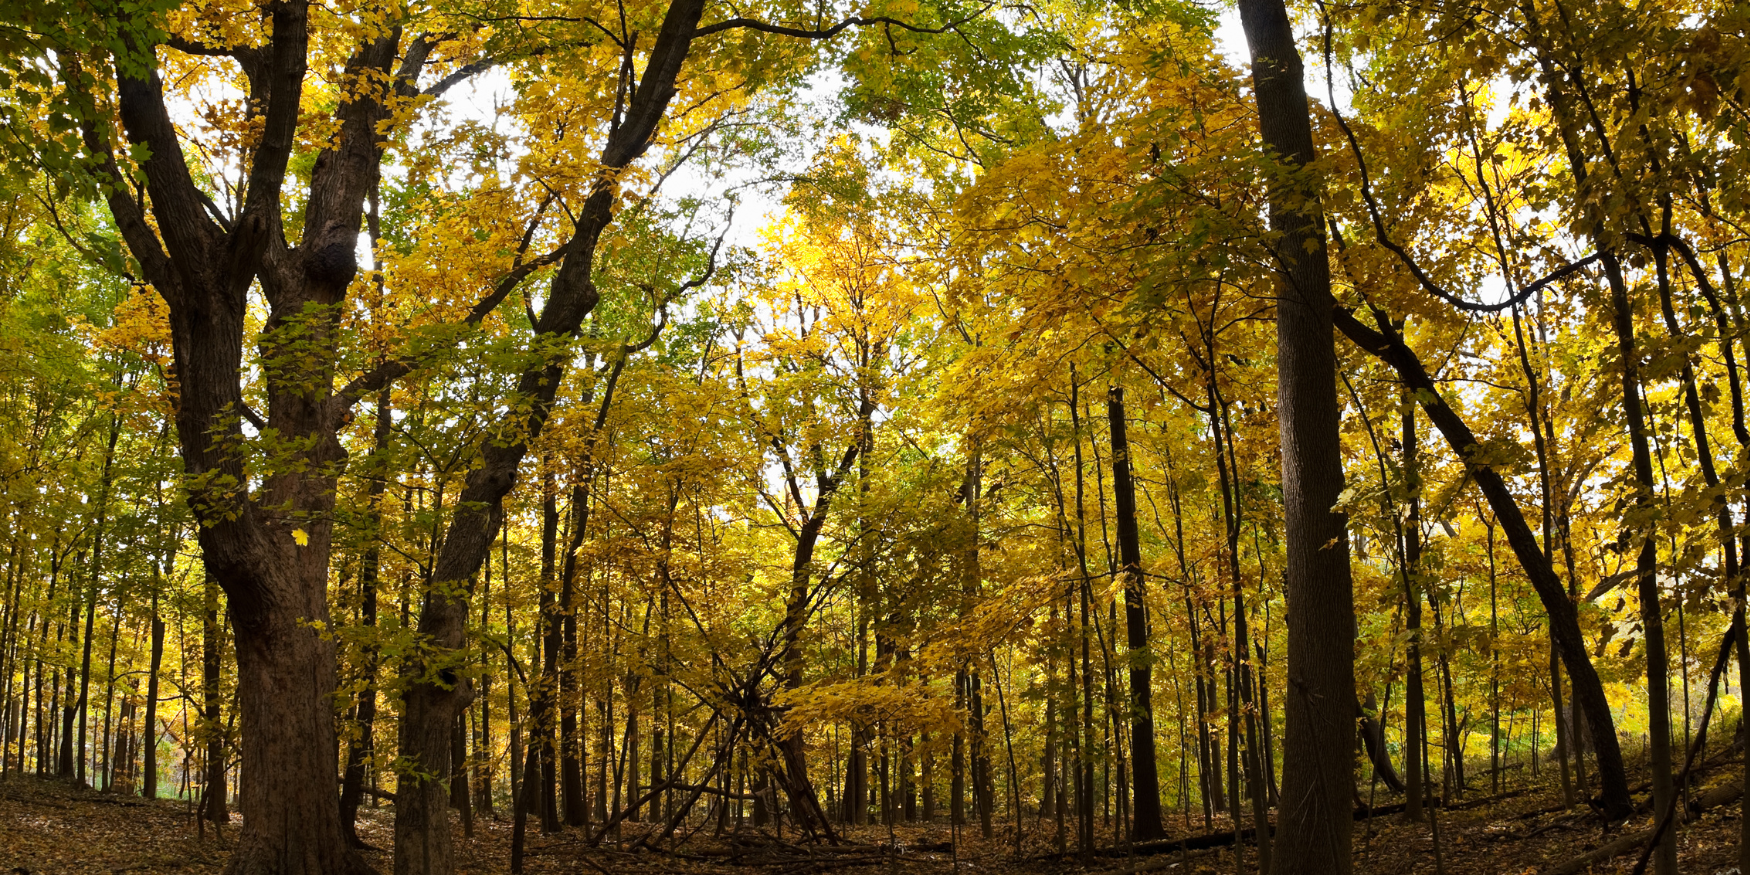 Spend a Day of Fun in the Forest Preserves of Western Cook County